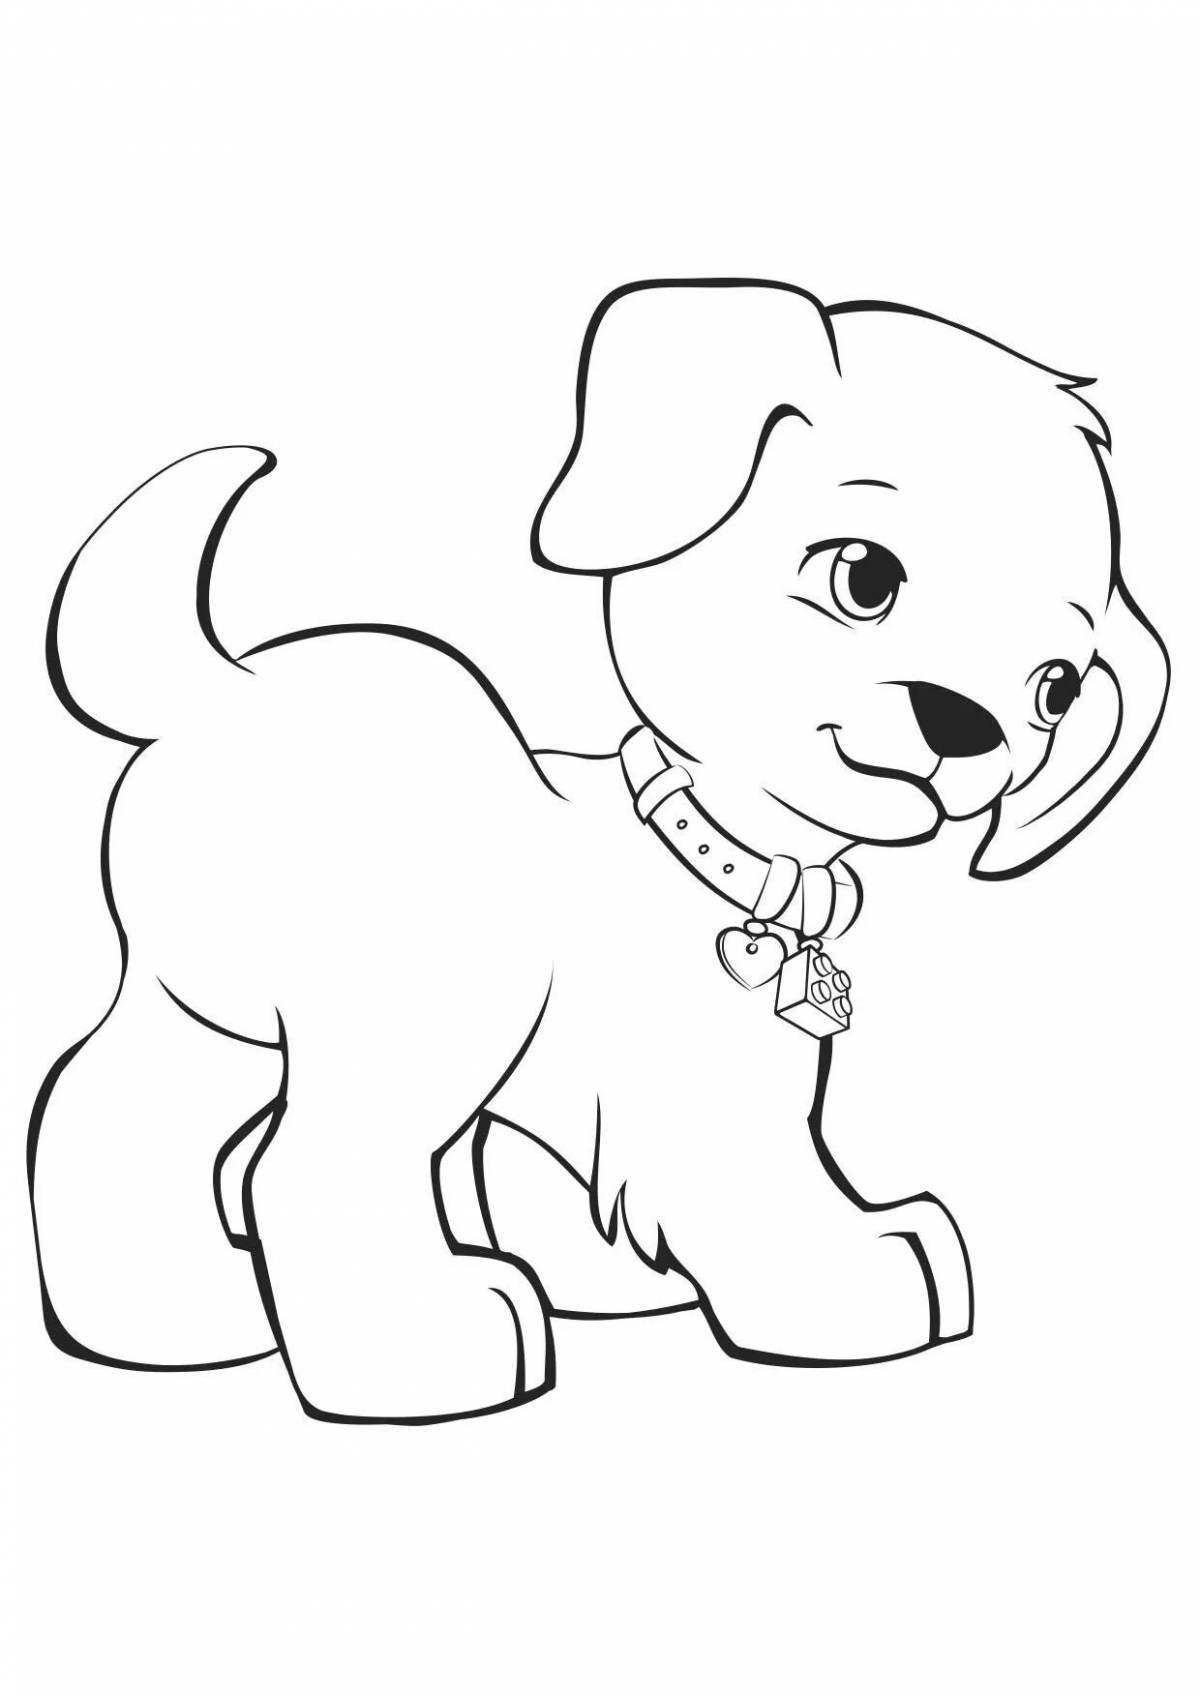 Great dog coloring book for kids 6-7 years old